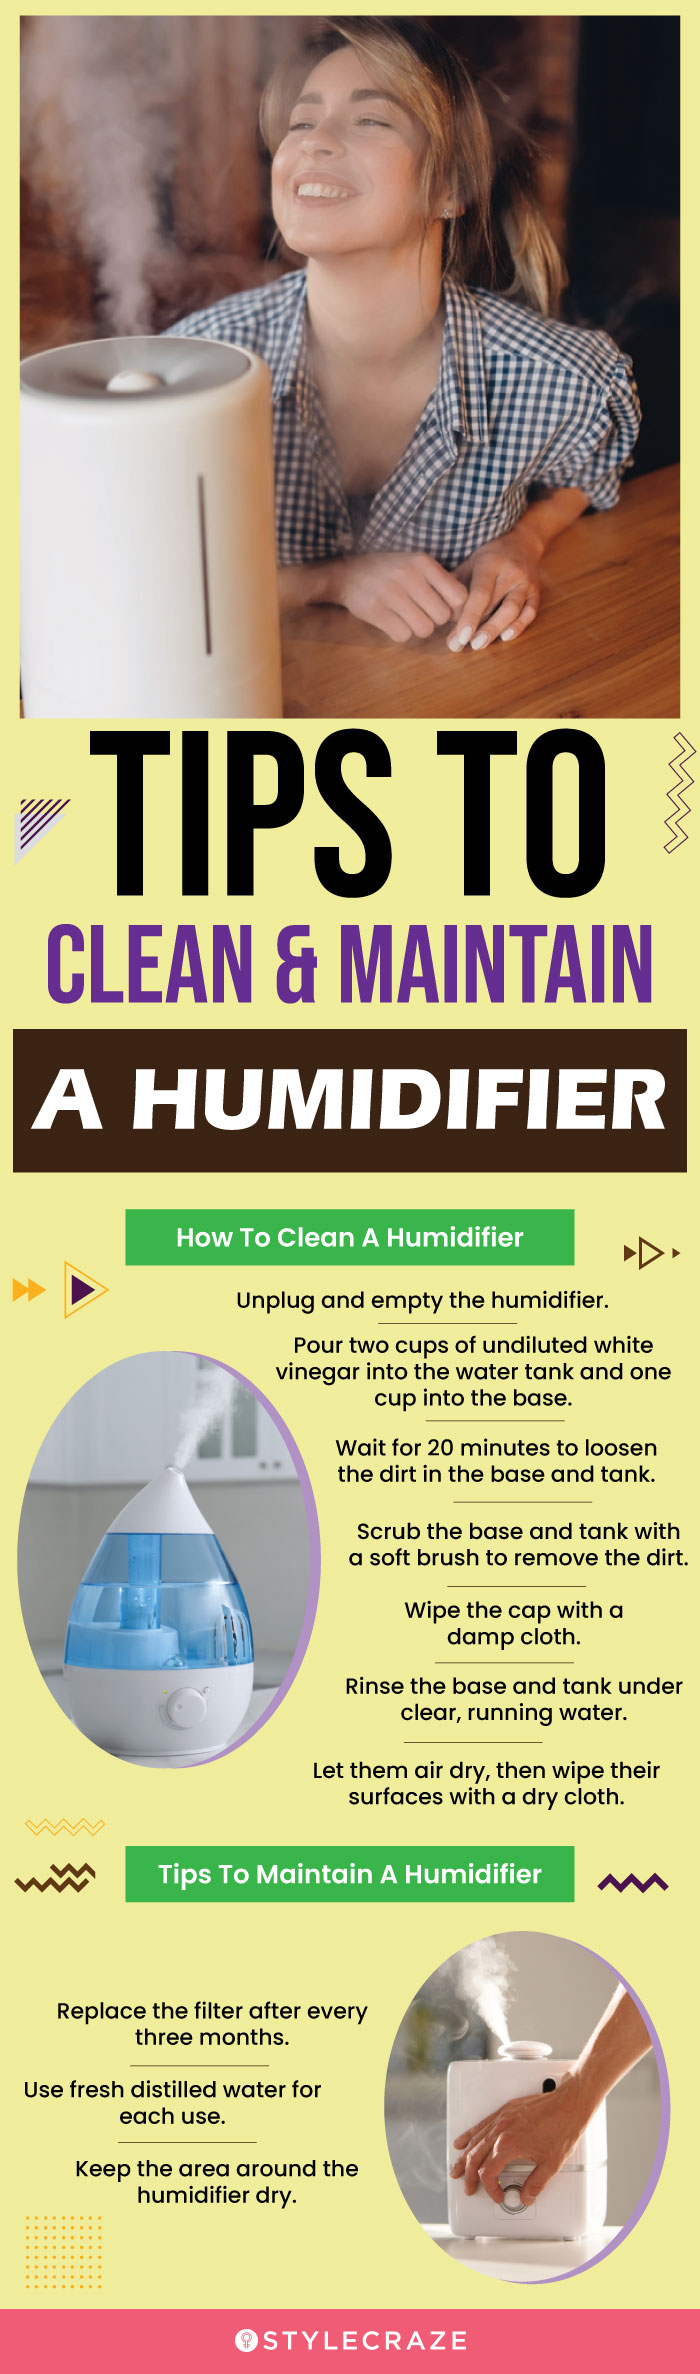 Tips To Clean & Maintain A Humidifier (infographic)